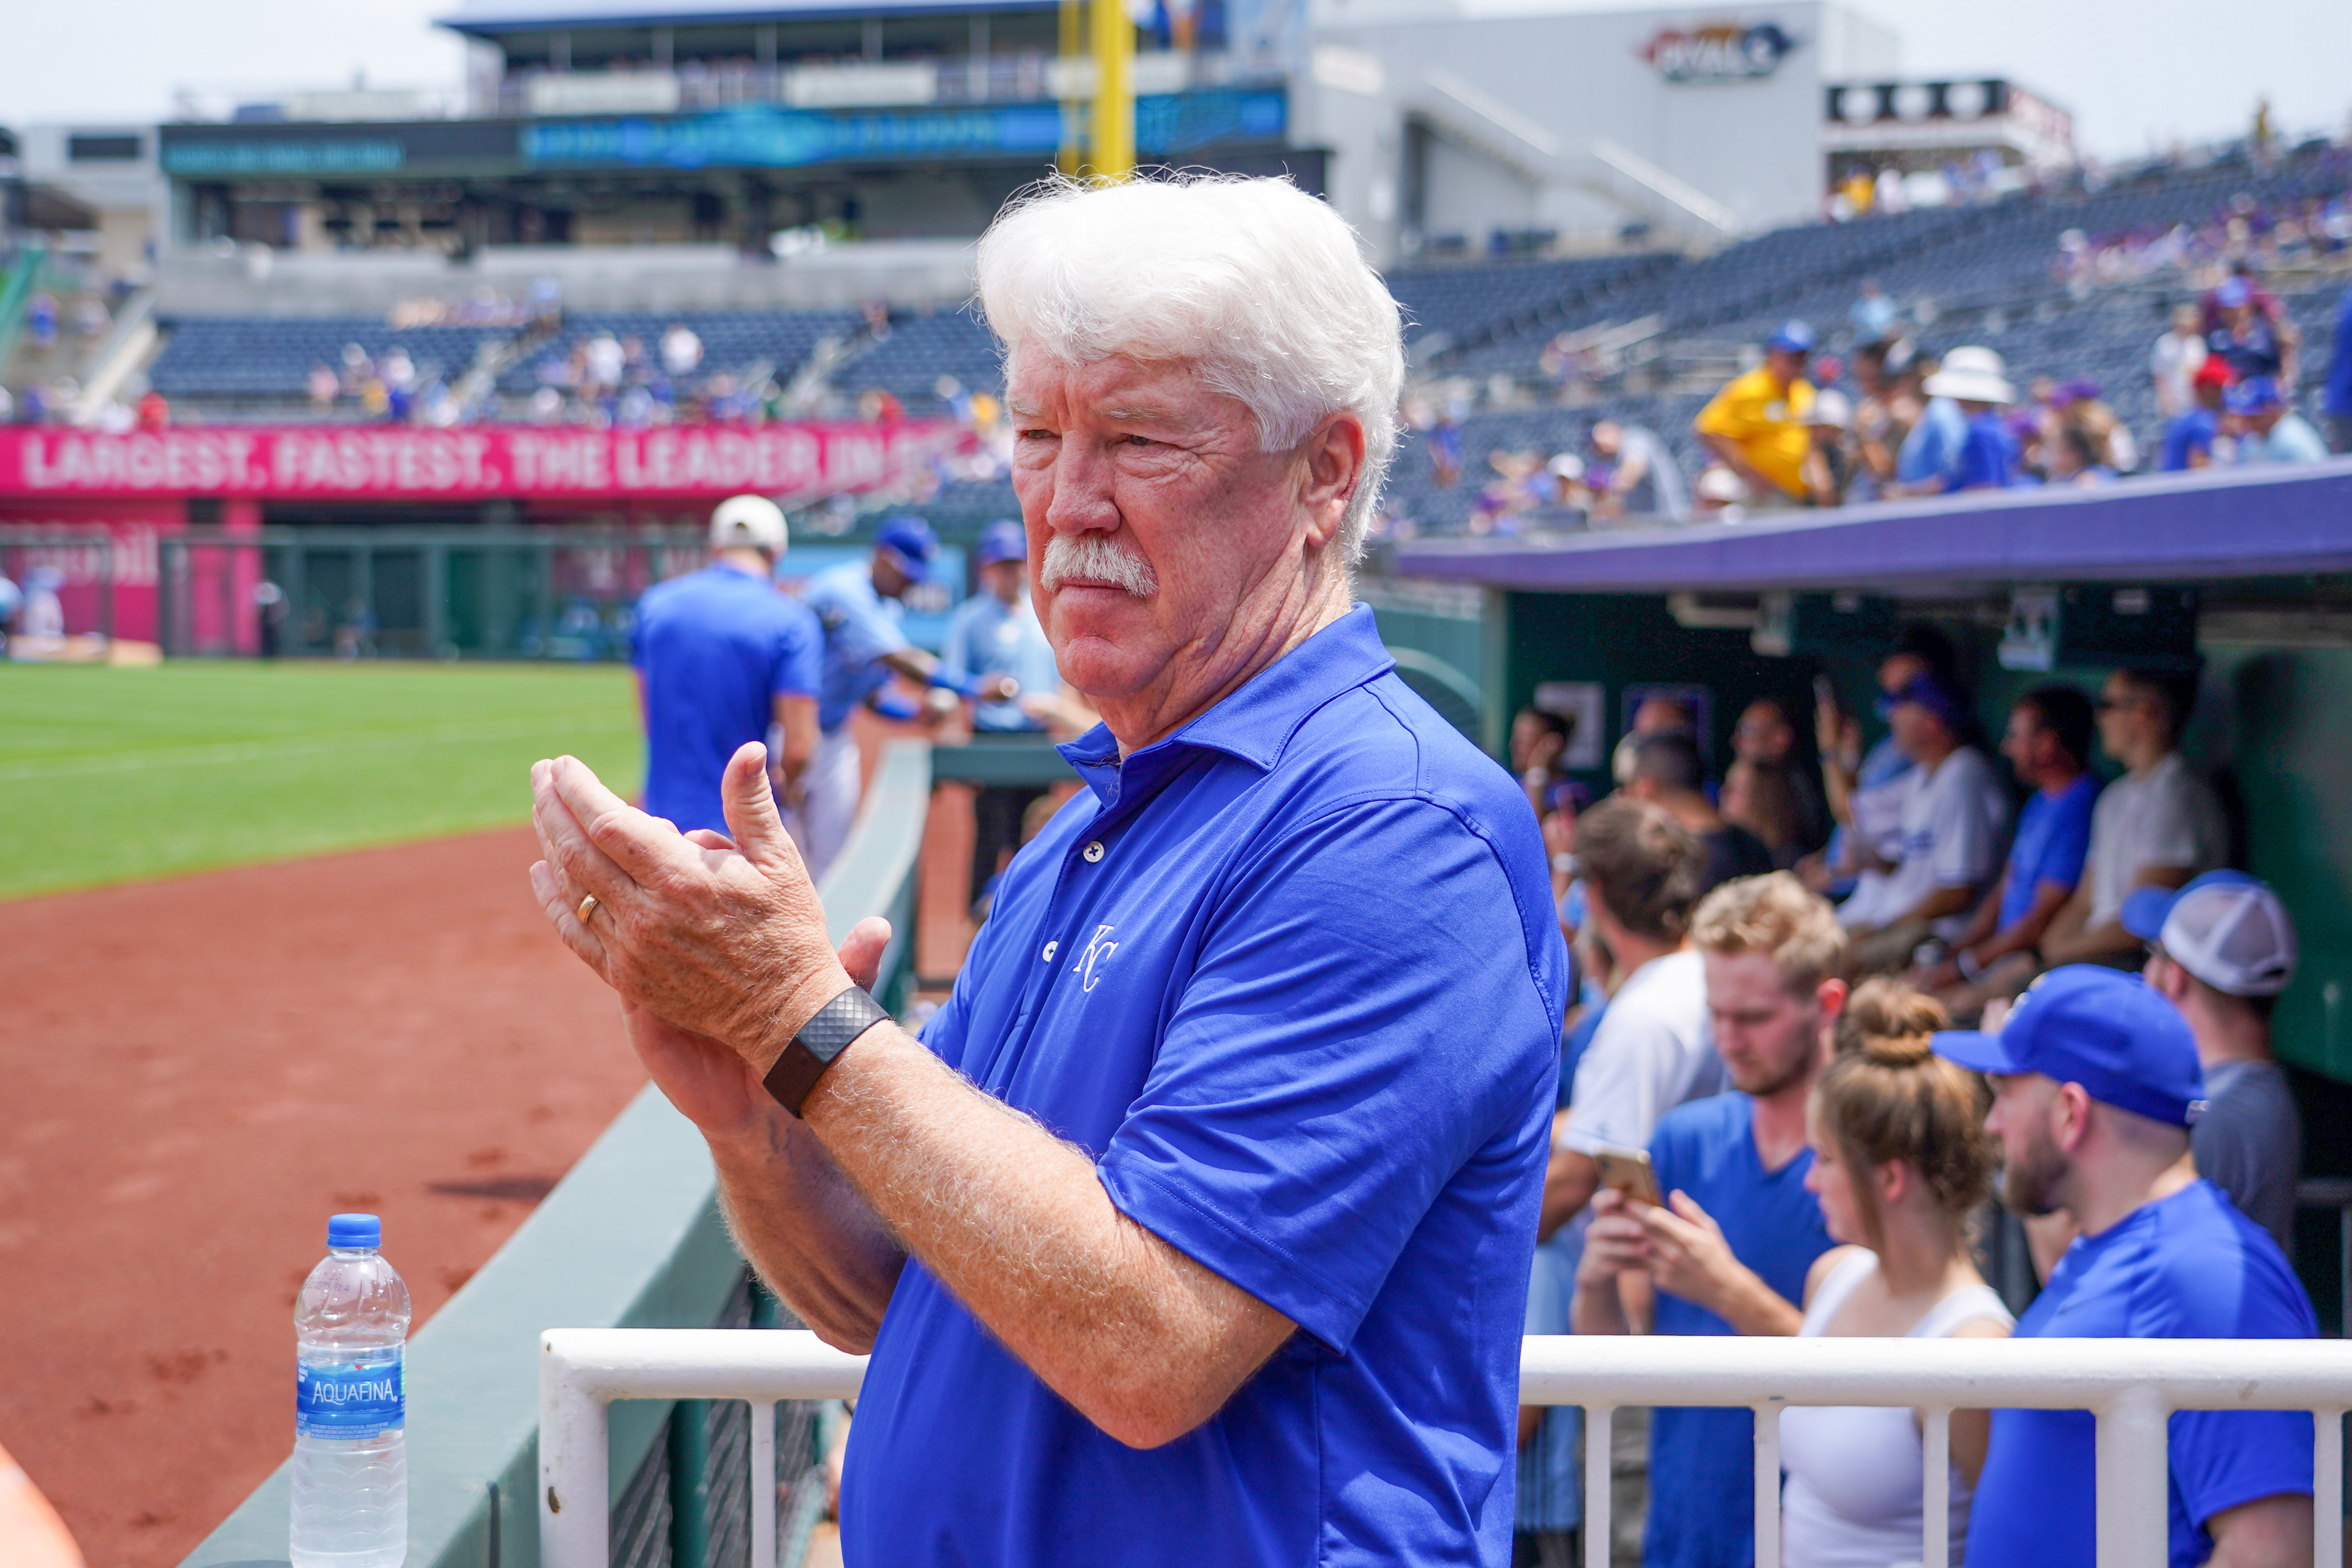 Kansas City Royals owners group principal owner John Sherman applauds during warm ups before the game against the Detroit Tigers at Kauffman Stadium.